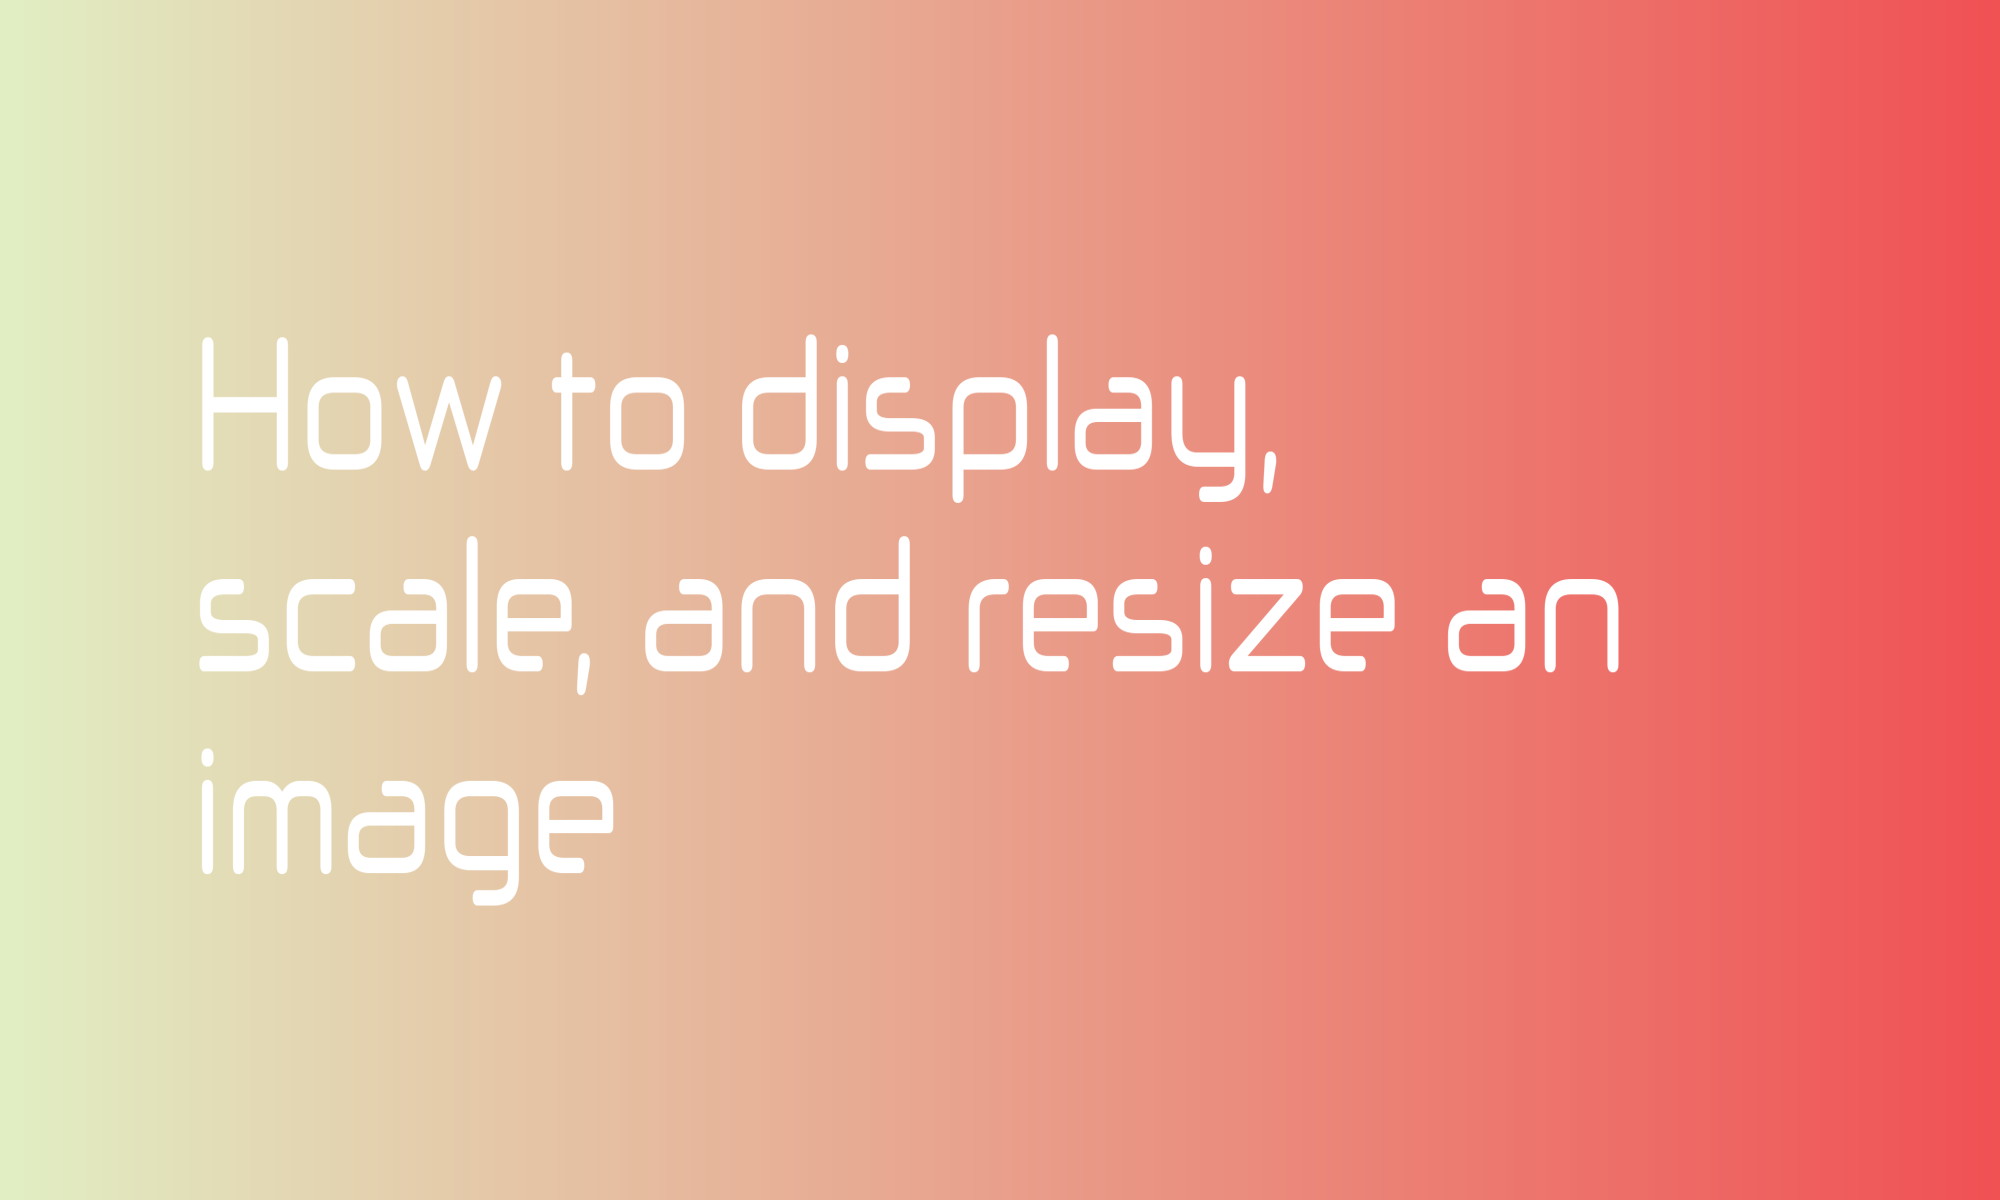 How to display, scale, and resize an image